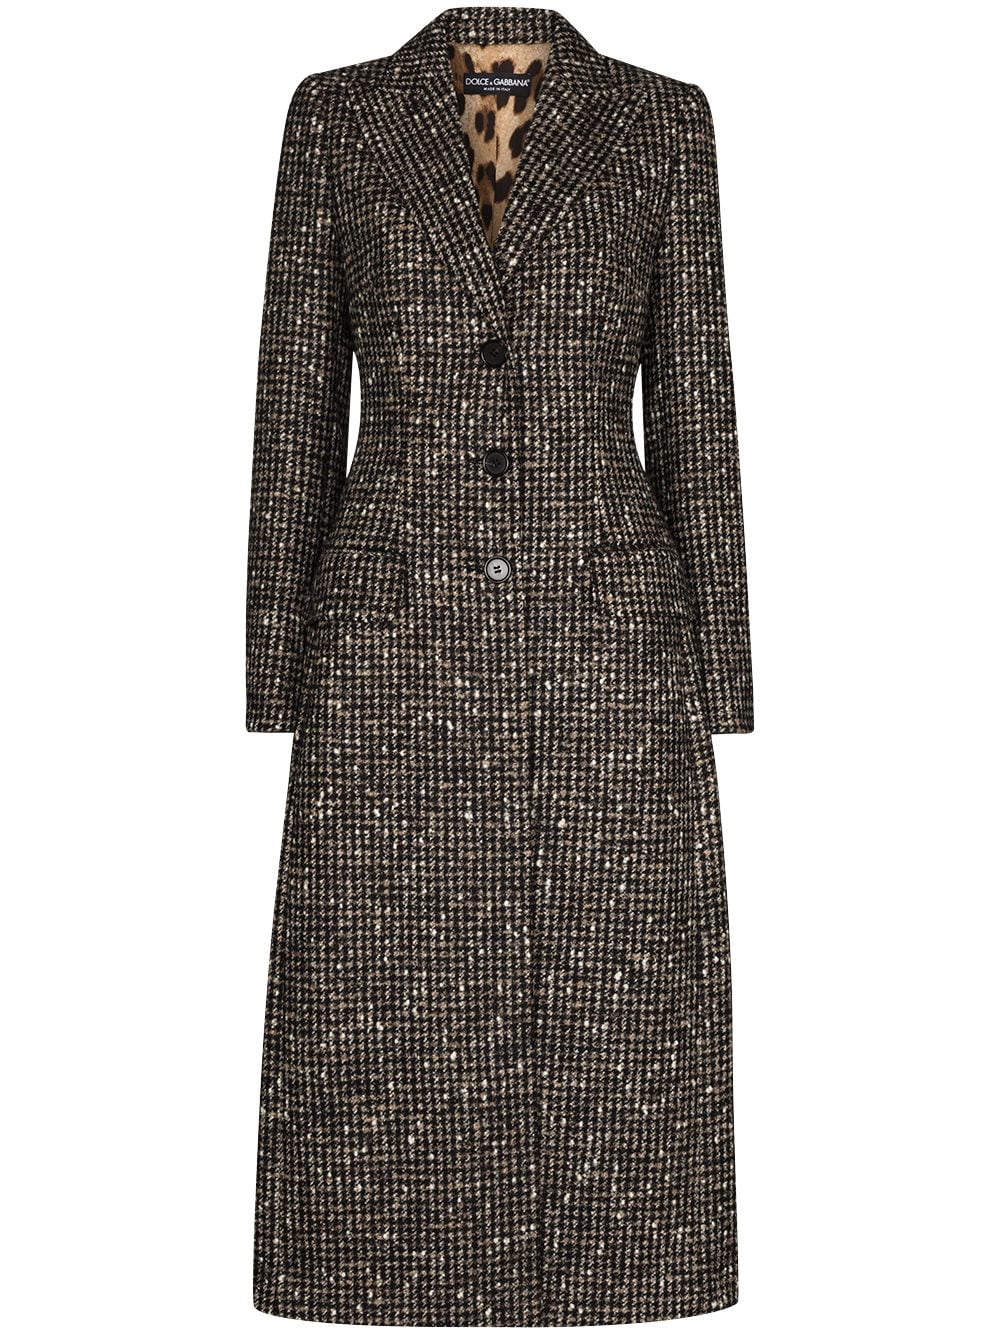 Dolce & Gabbana single-breasted Houndstooth Coat - Farfetch